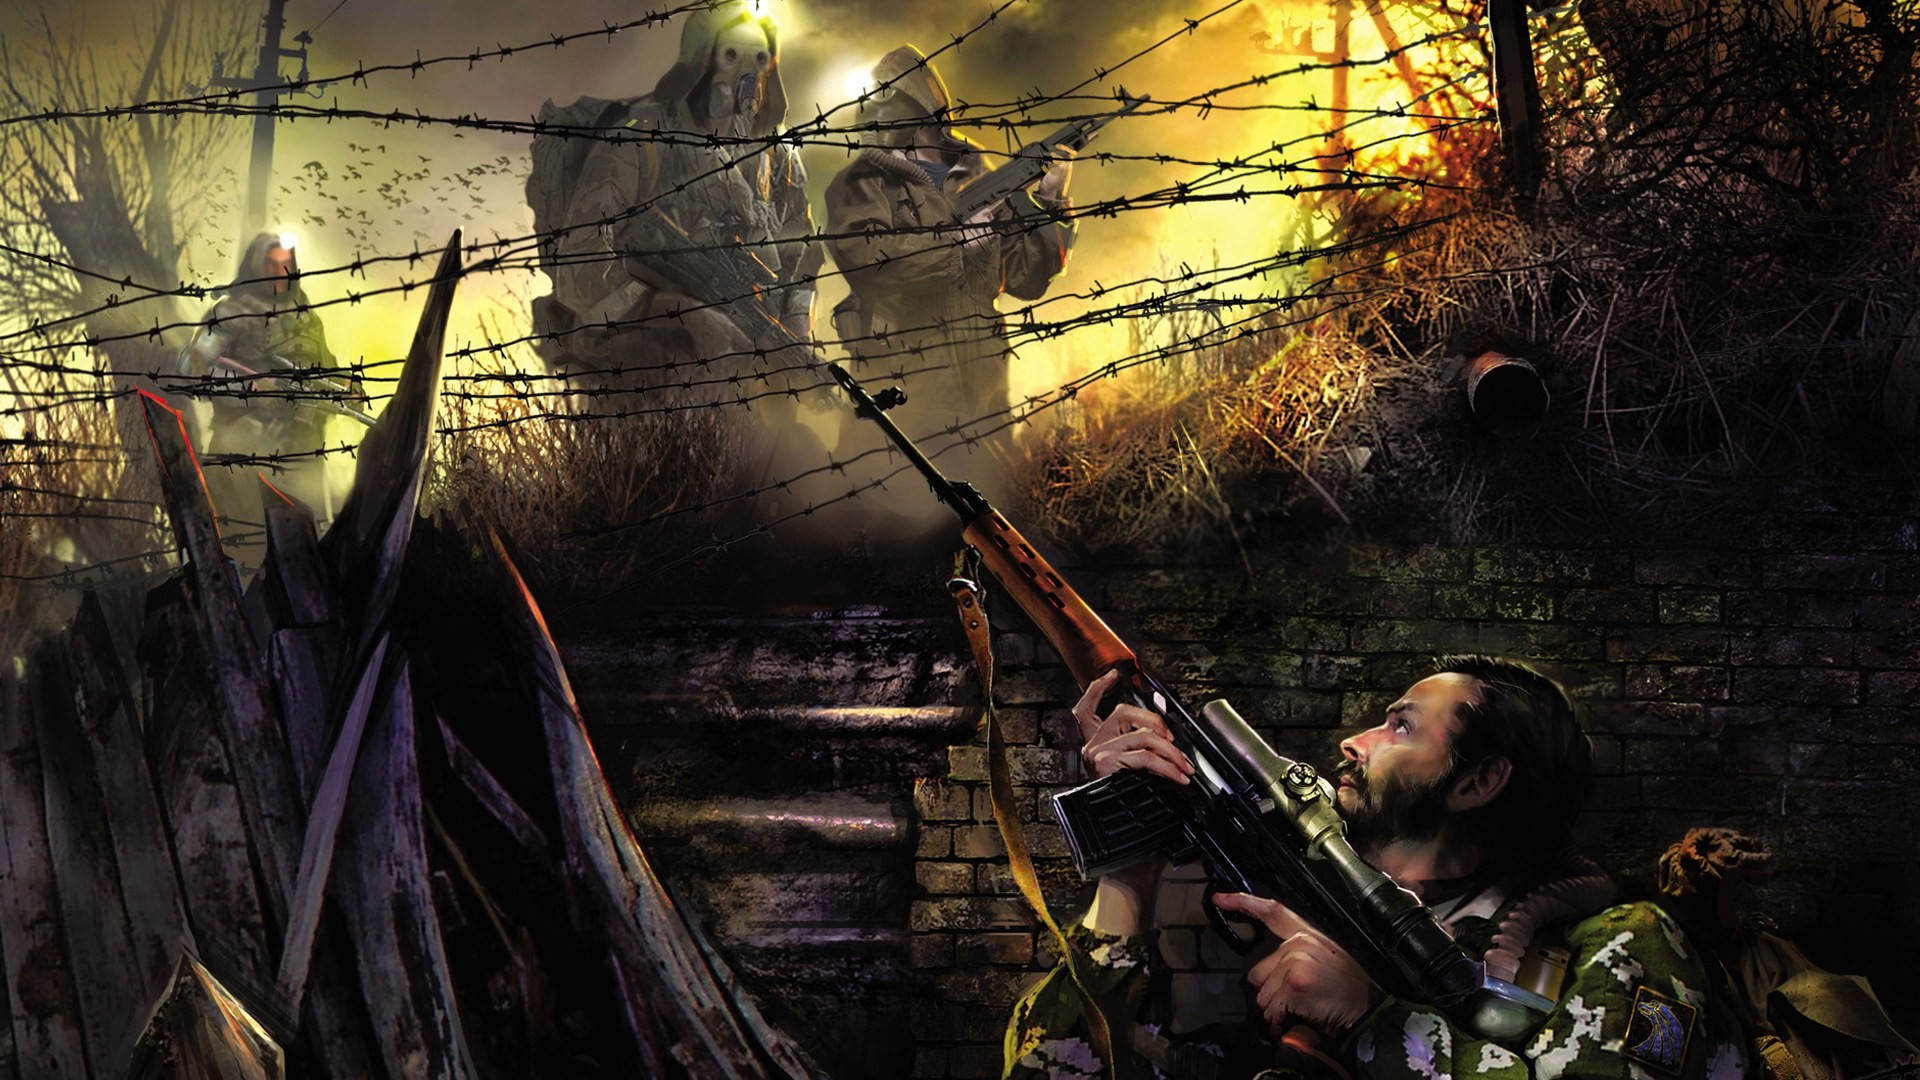 General 1920x1080 S.T.A.L.K.E.R. video games artwork gas masks apocalyptic PC gaming video game art weapon